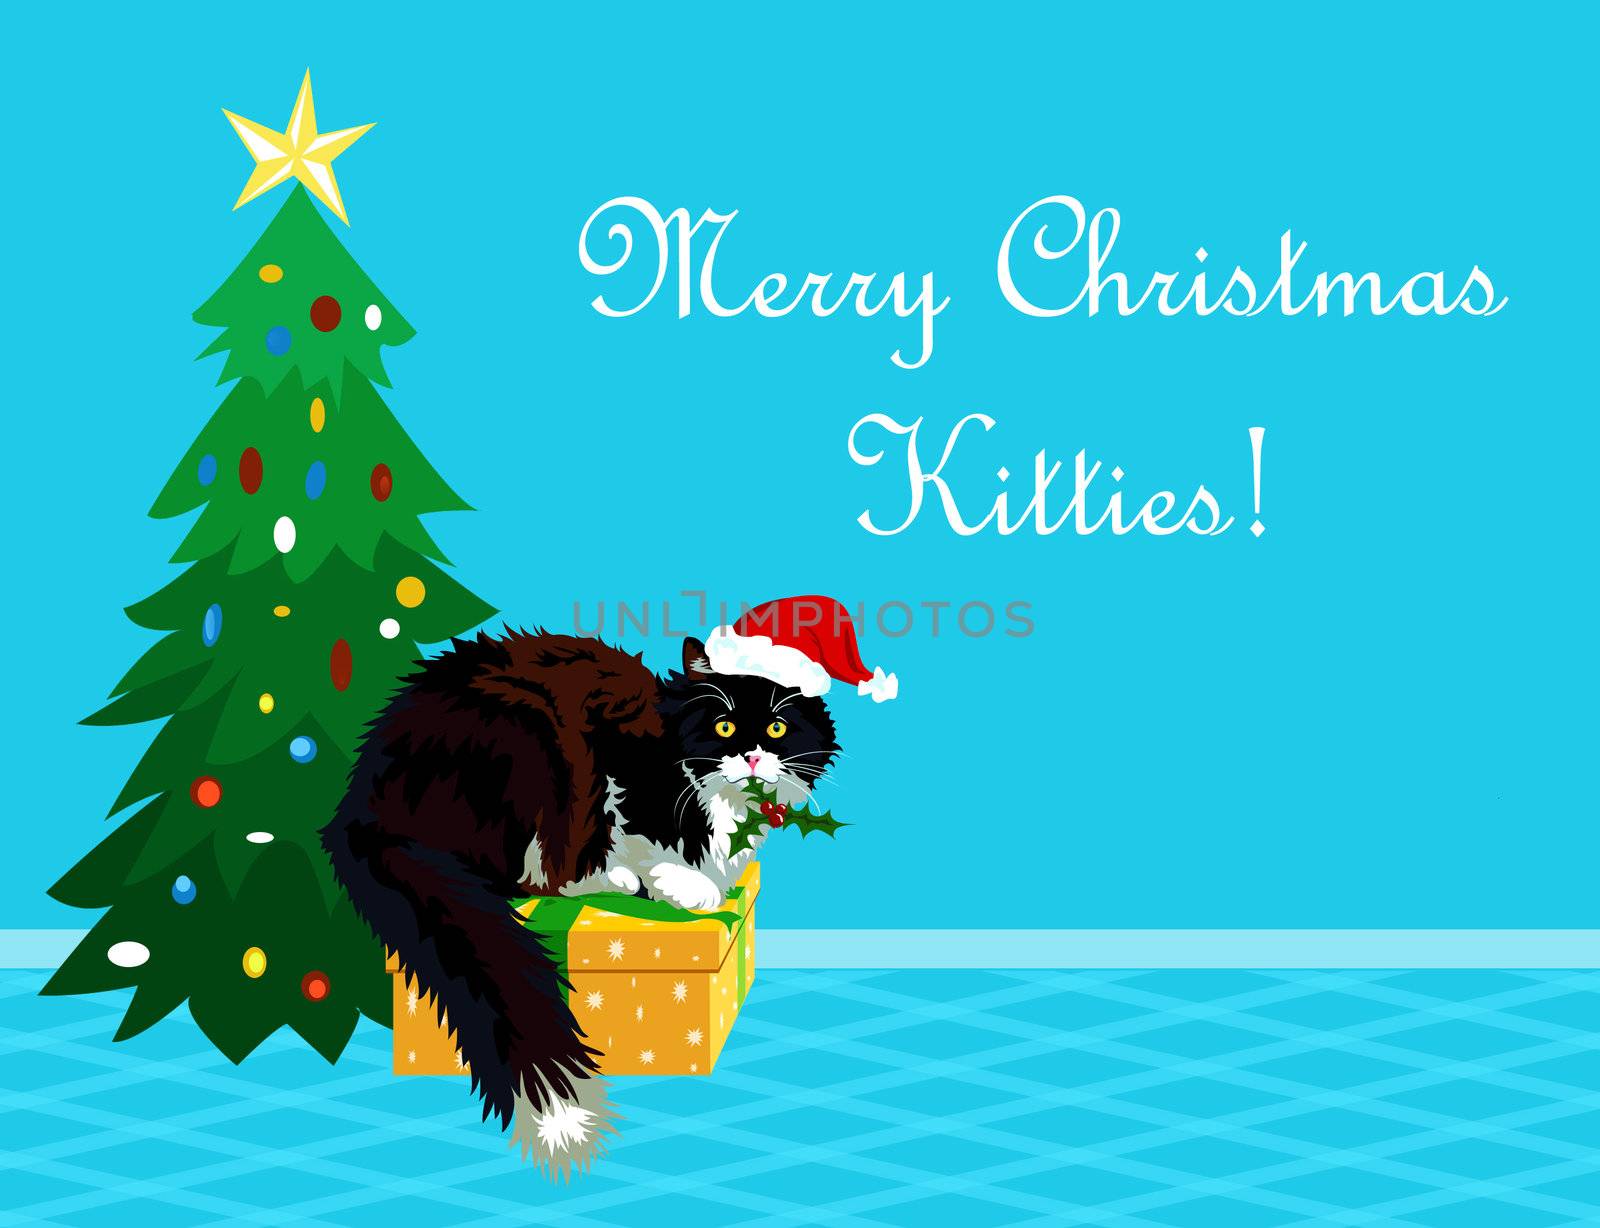 Christmas cat on a gift holding mistletoe and making wishes. by Mirage3